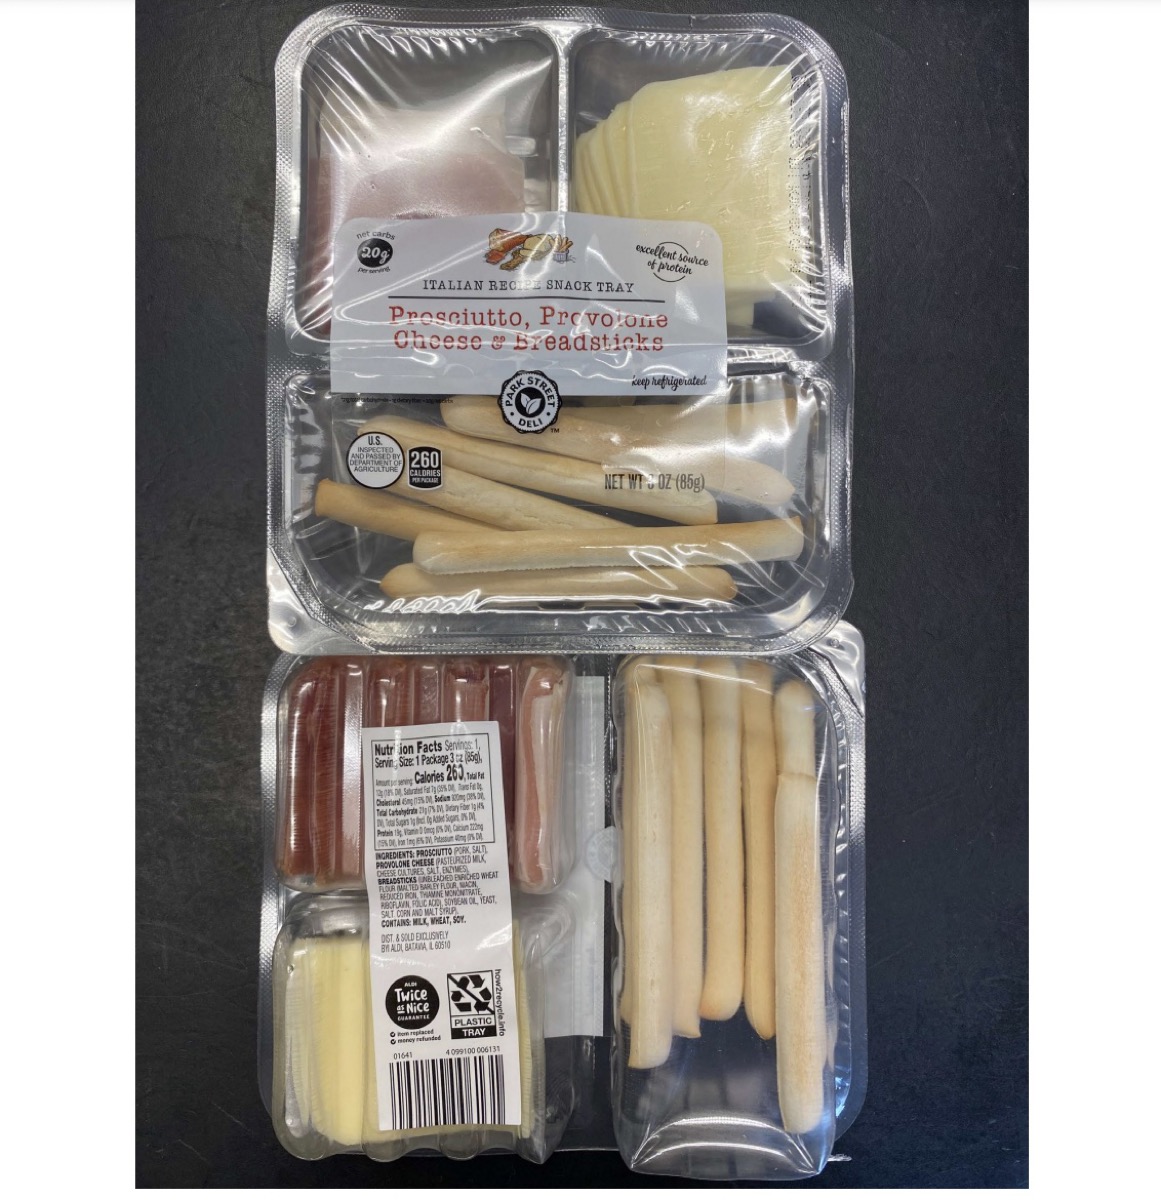 plastic snack tray with breadsticks and meat and cheese